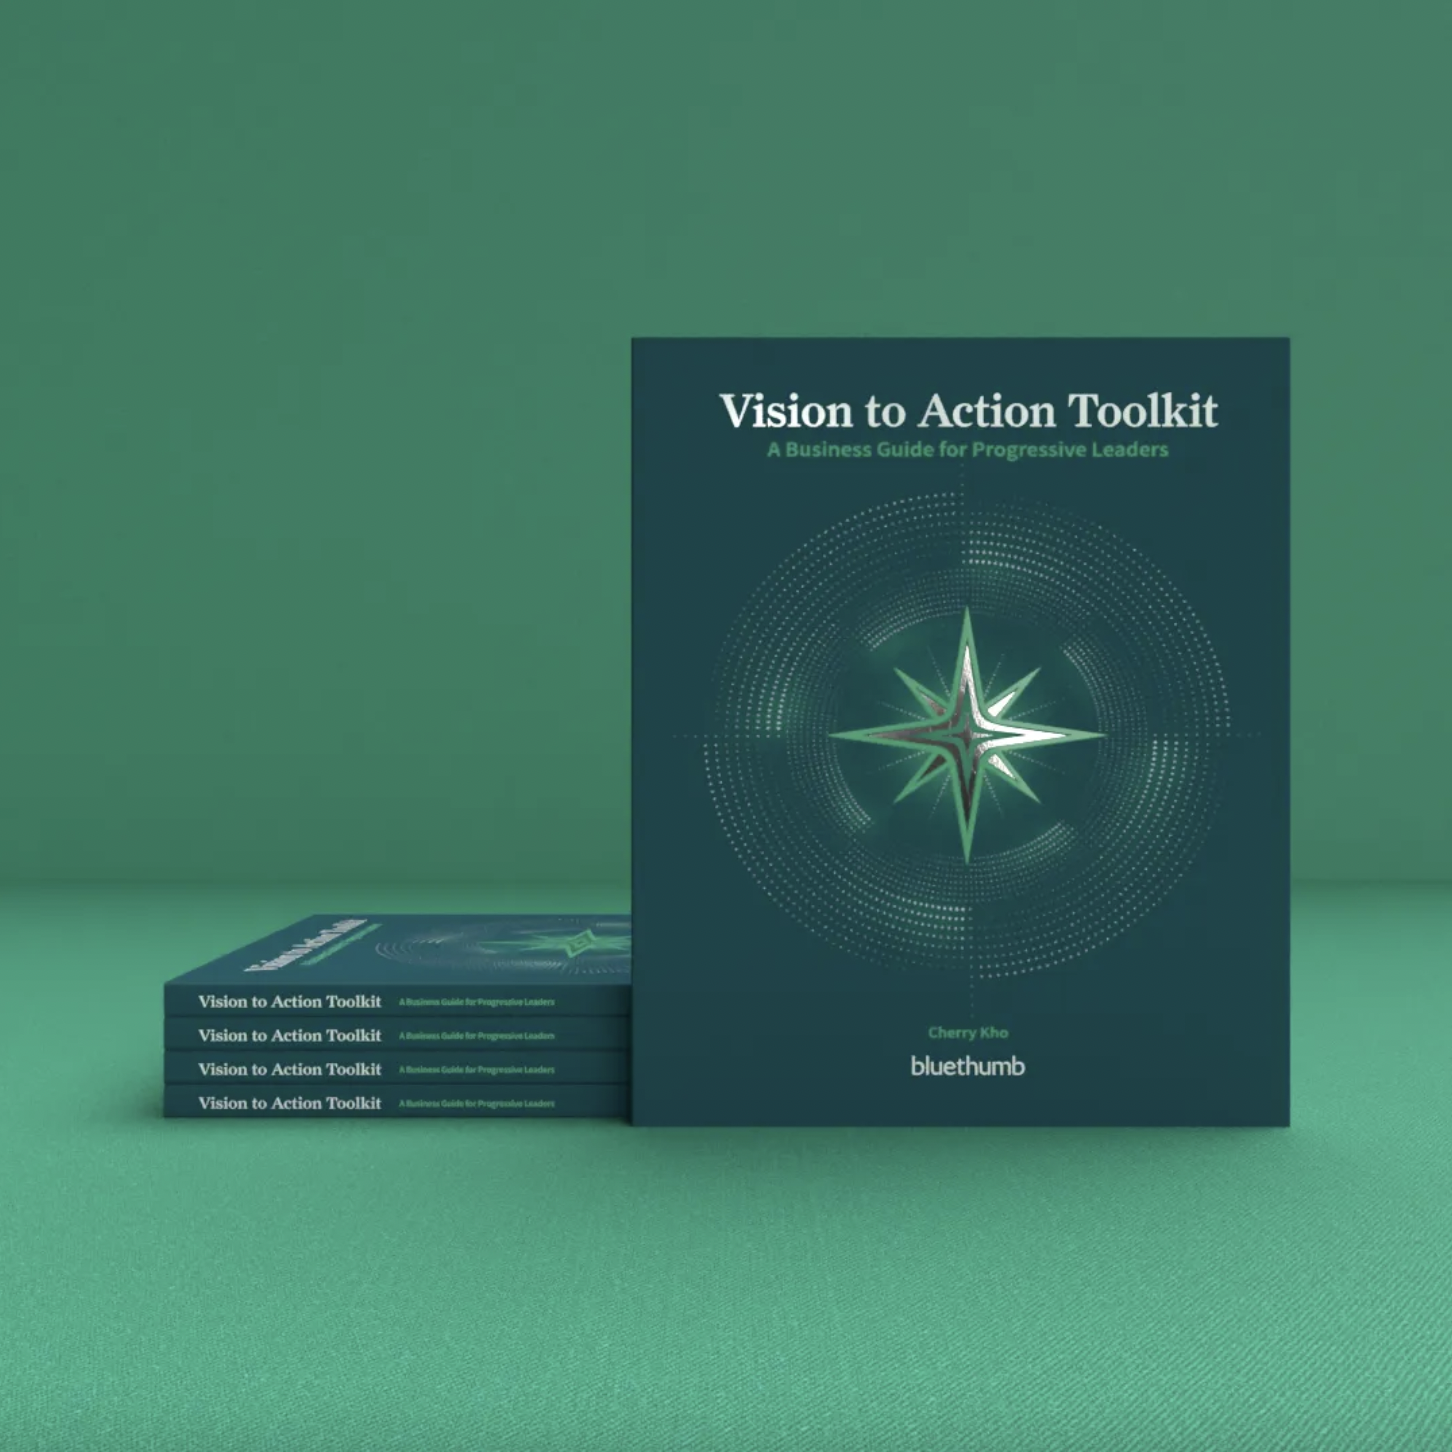 “The Vision to Action Toolkit”